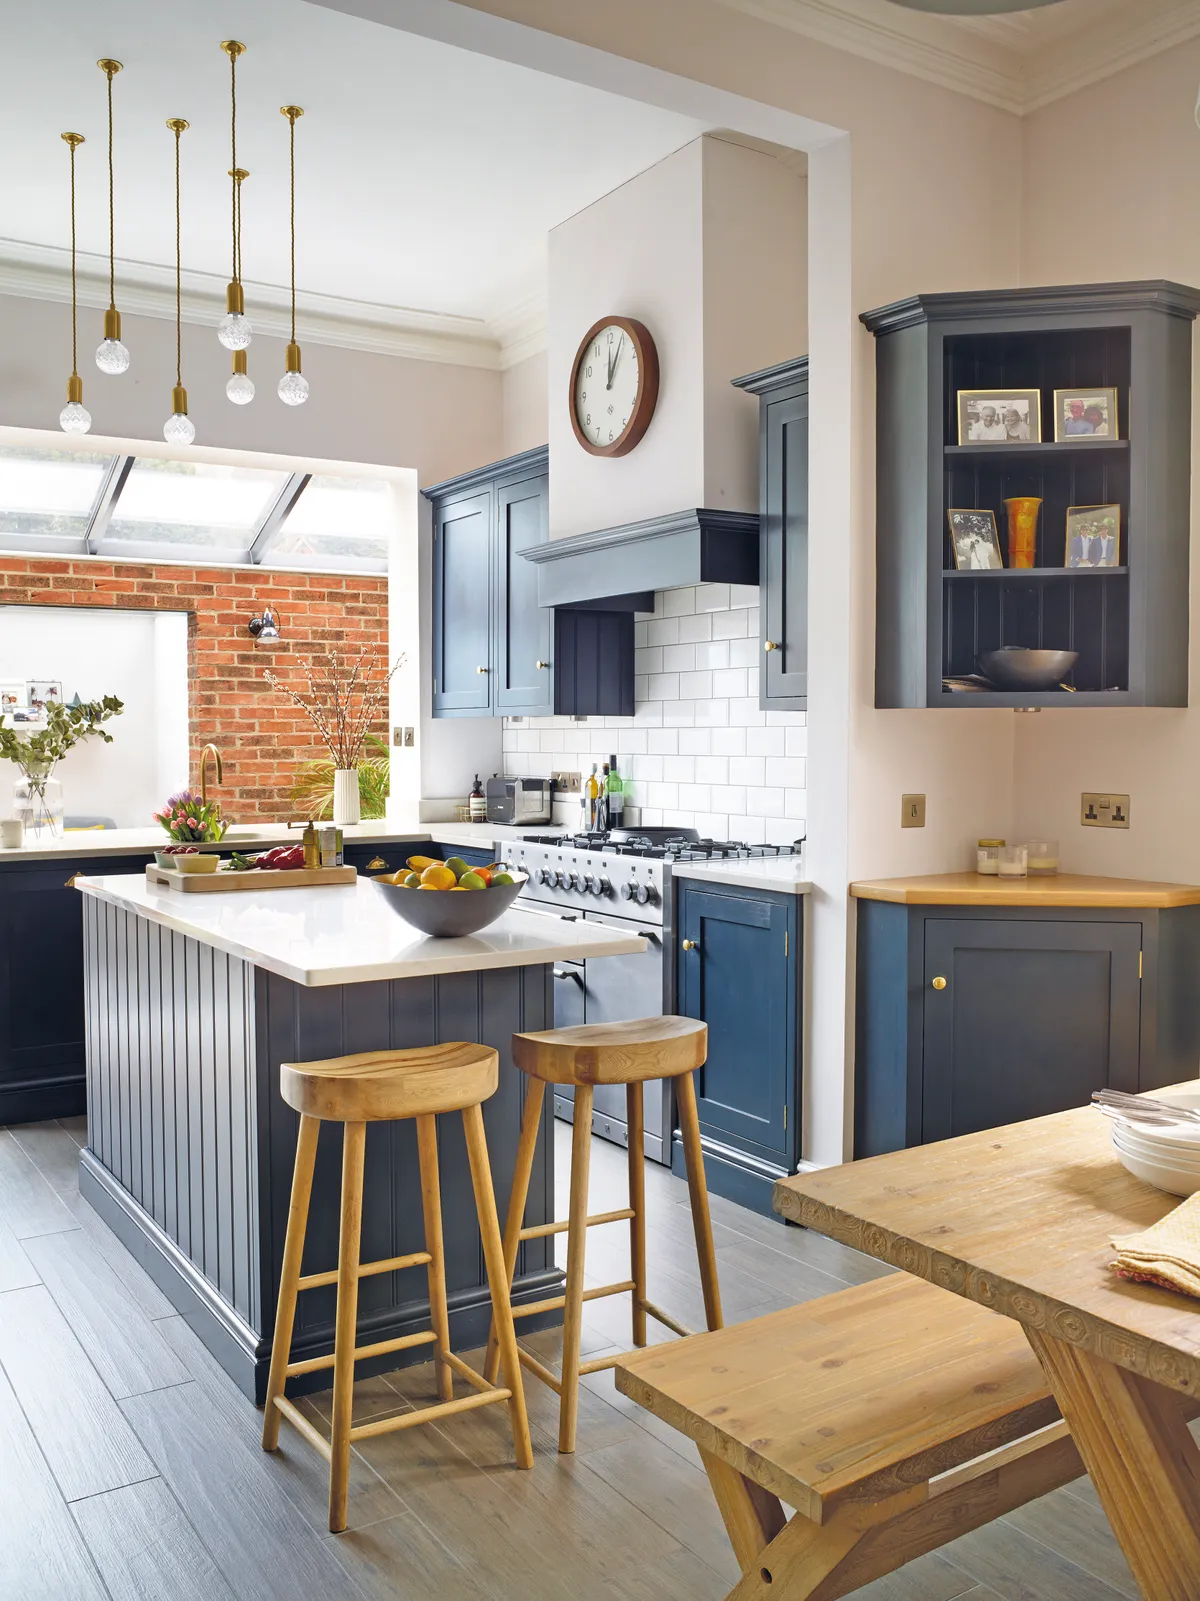 A row of skylights flood the kitchen with natural light, to make the space bright. Sarah ensures the sleek style remains homely by displaying family photographs in the open cabinetry. Wooden stools and a feature clock add a contemporary country feel